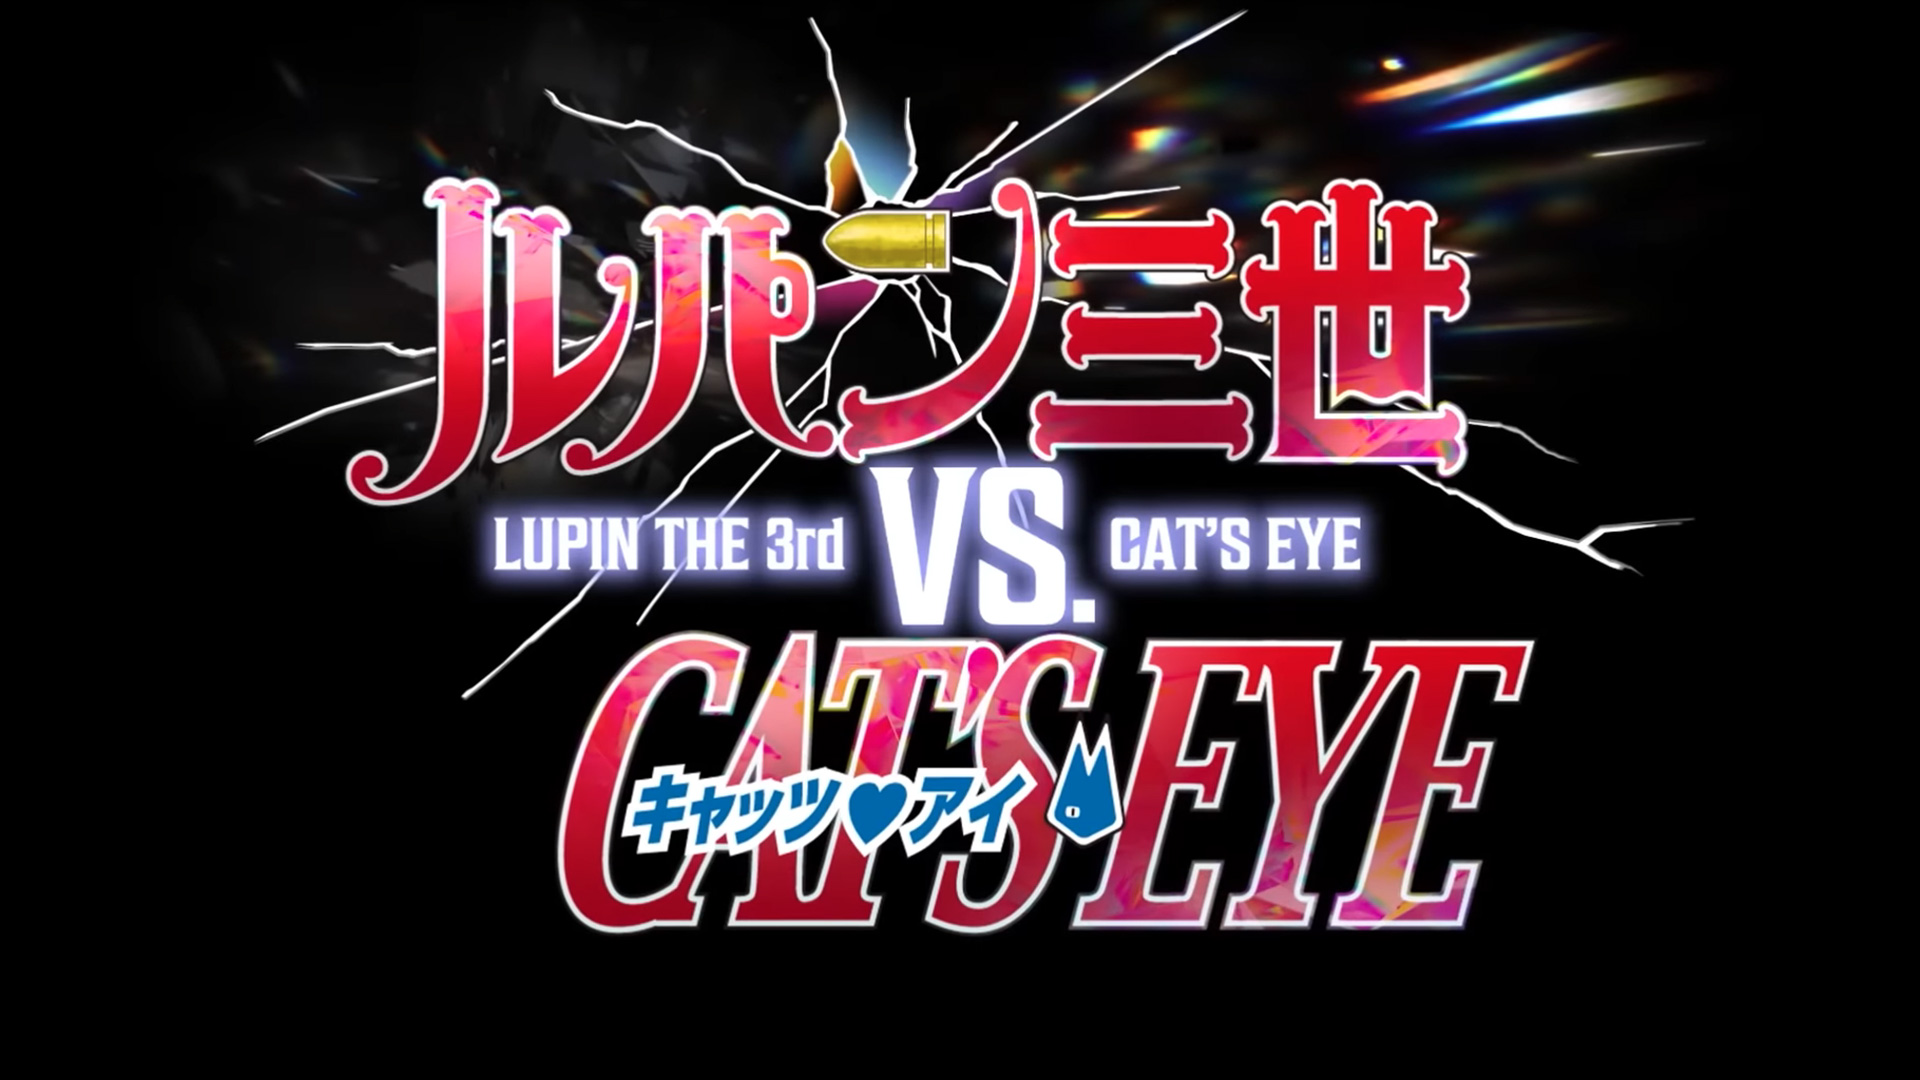 Lupin the 3rd vs. Cat's Eyes